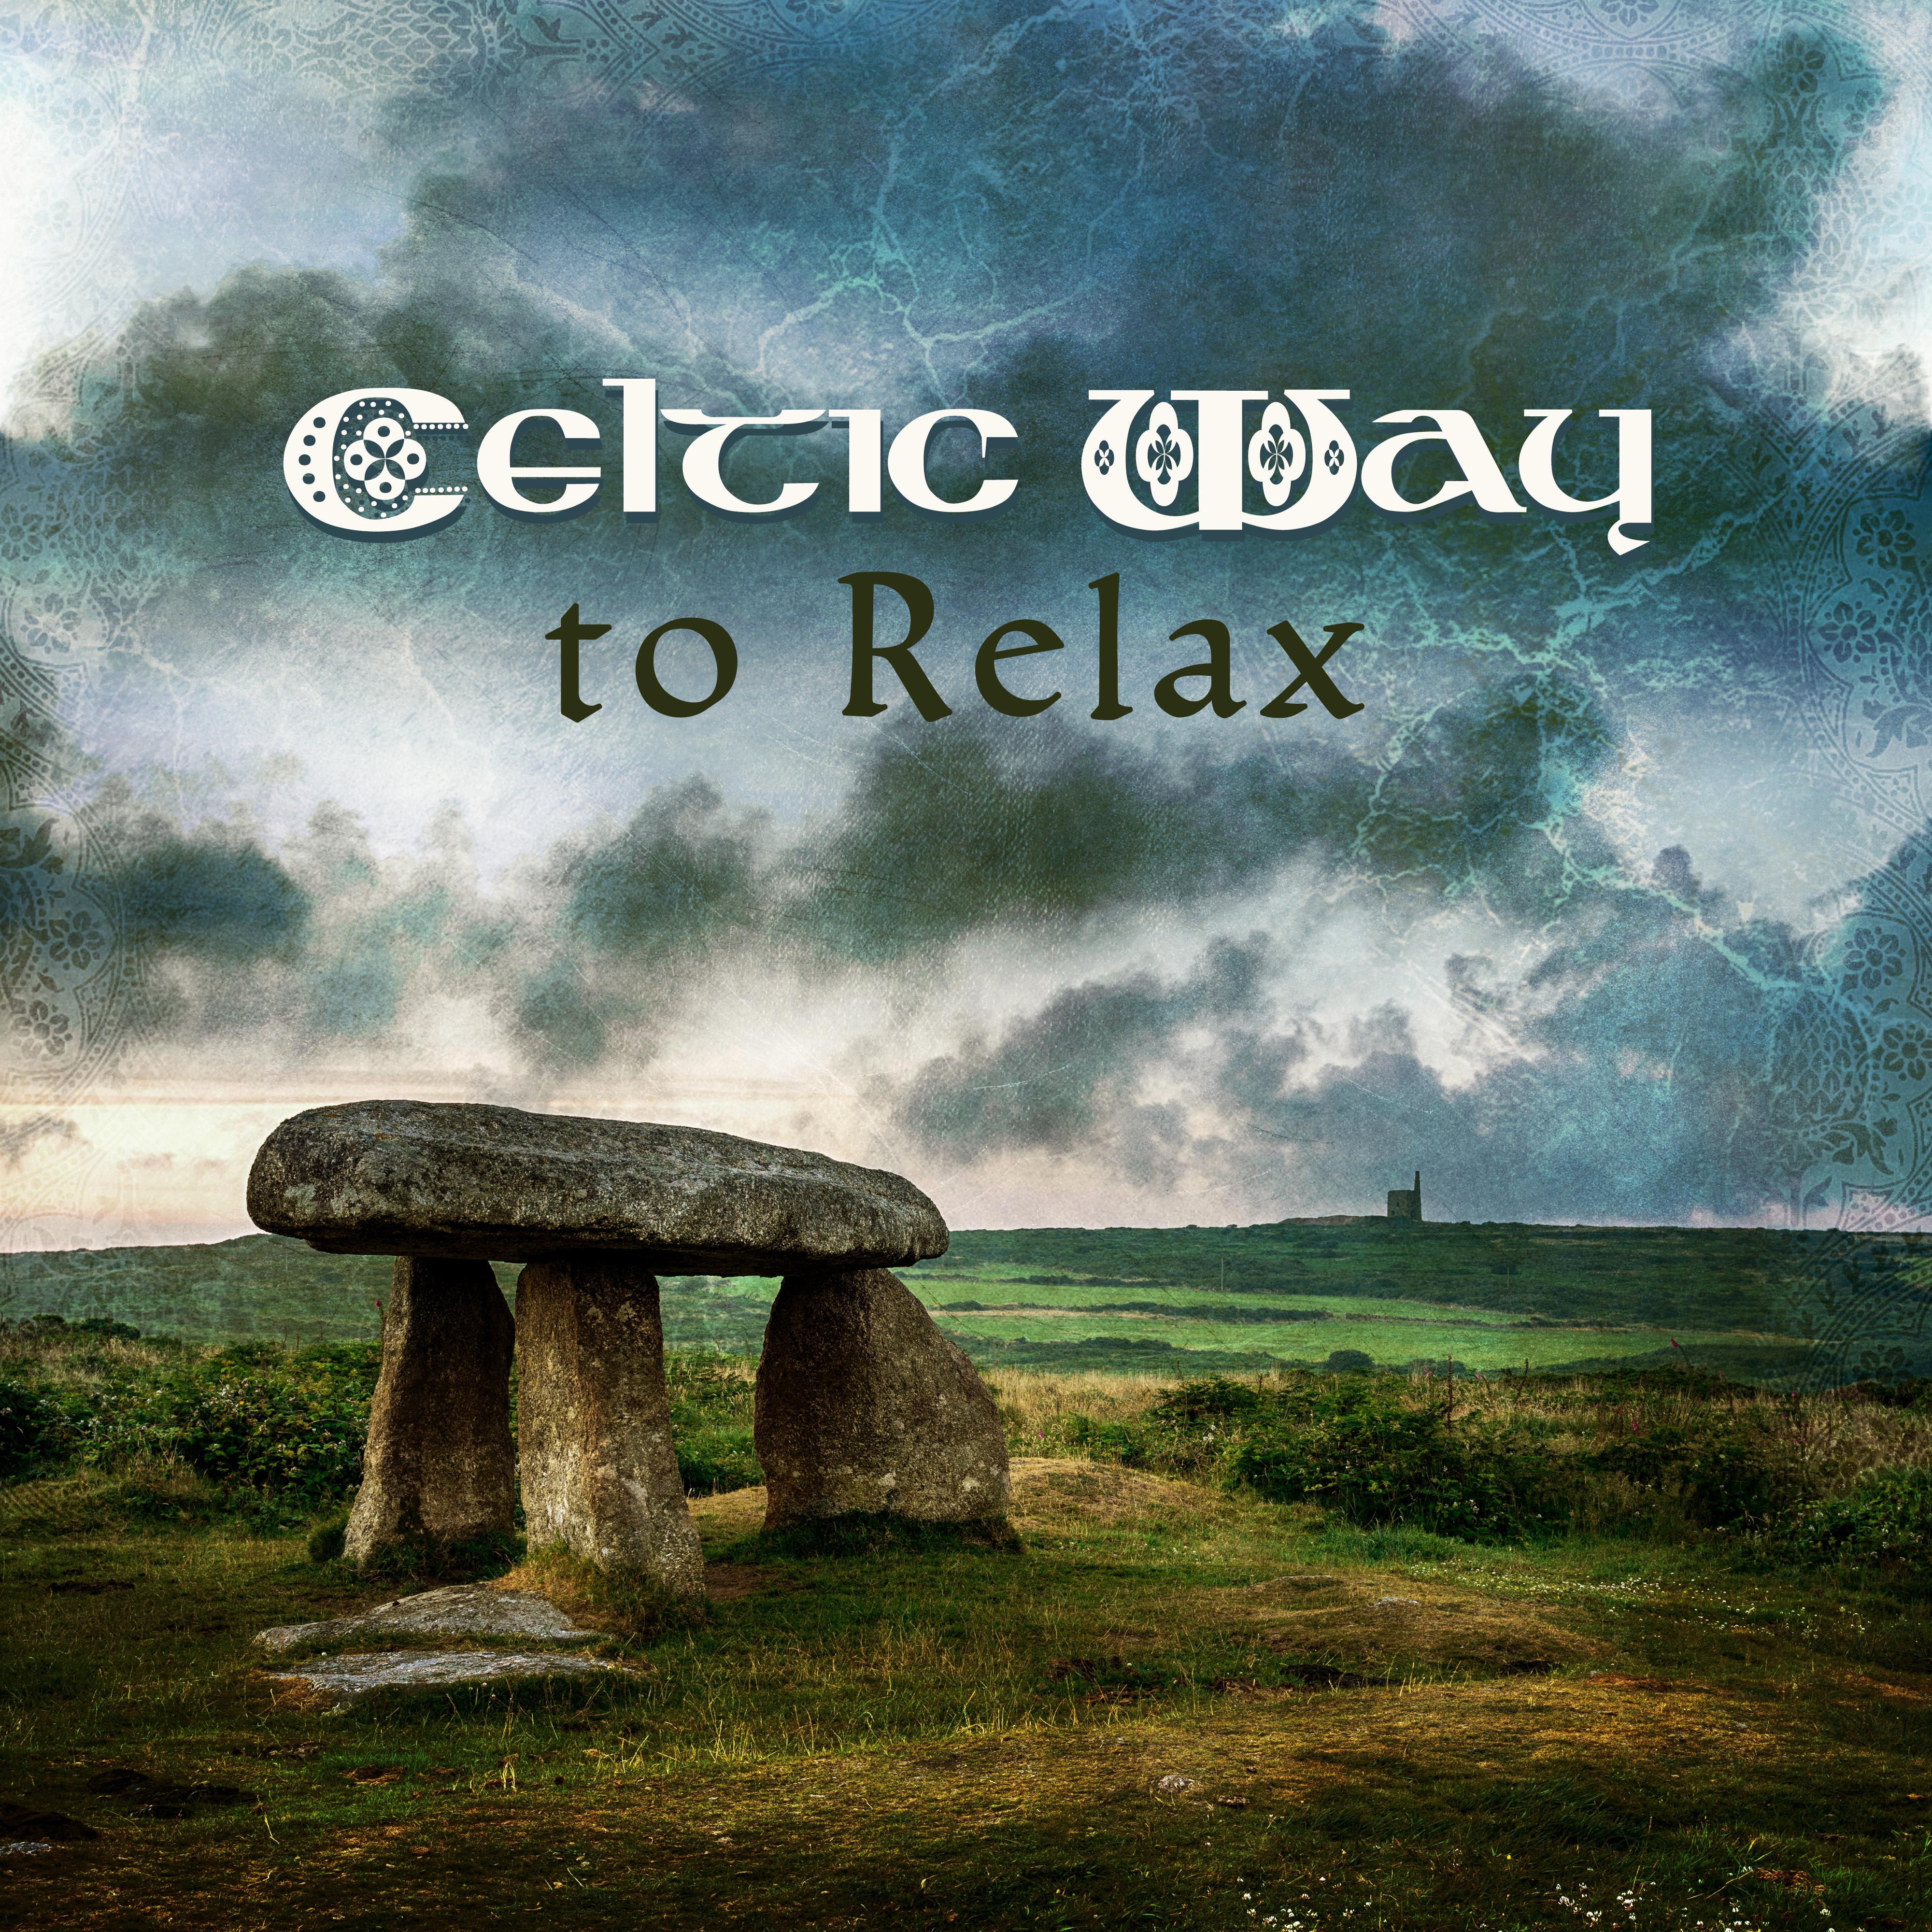 Celtic Way to Relax - Irish Relaxation Music to Rest and Chill Out